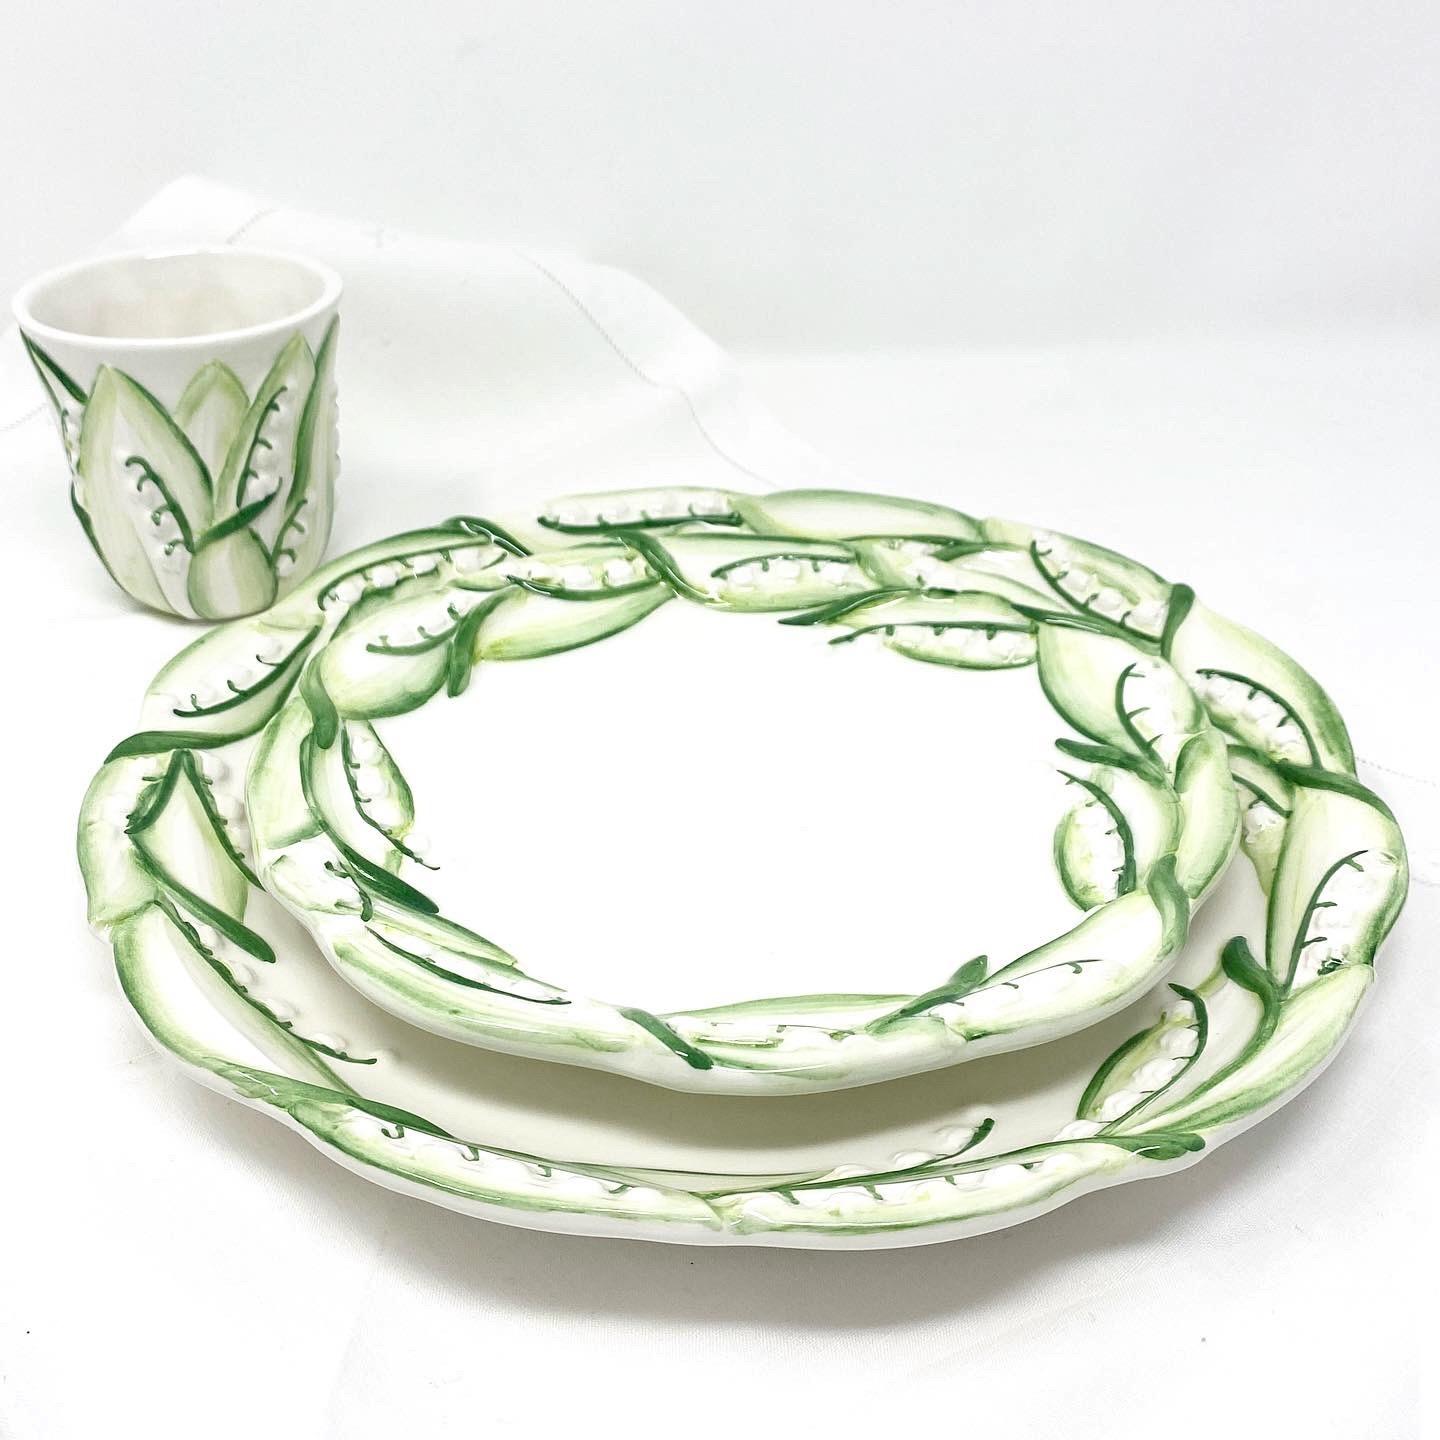 Italian Majolica Lily of the Valley Dessert Plates, Handmade in Italy, S/4 For Sale